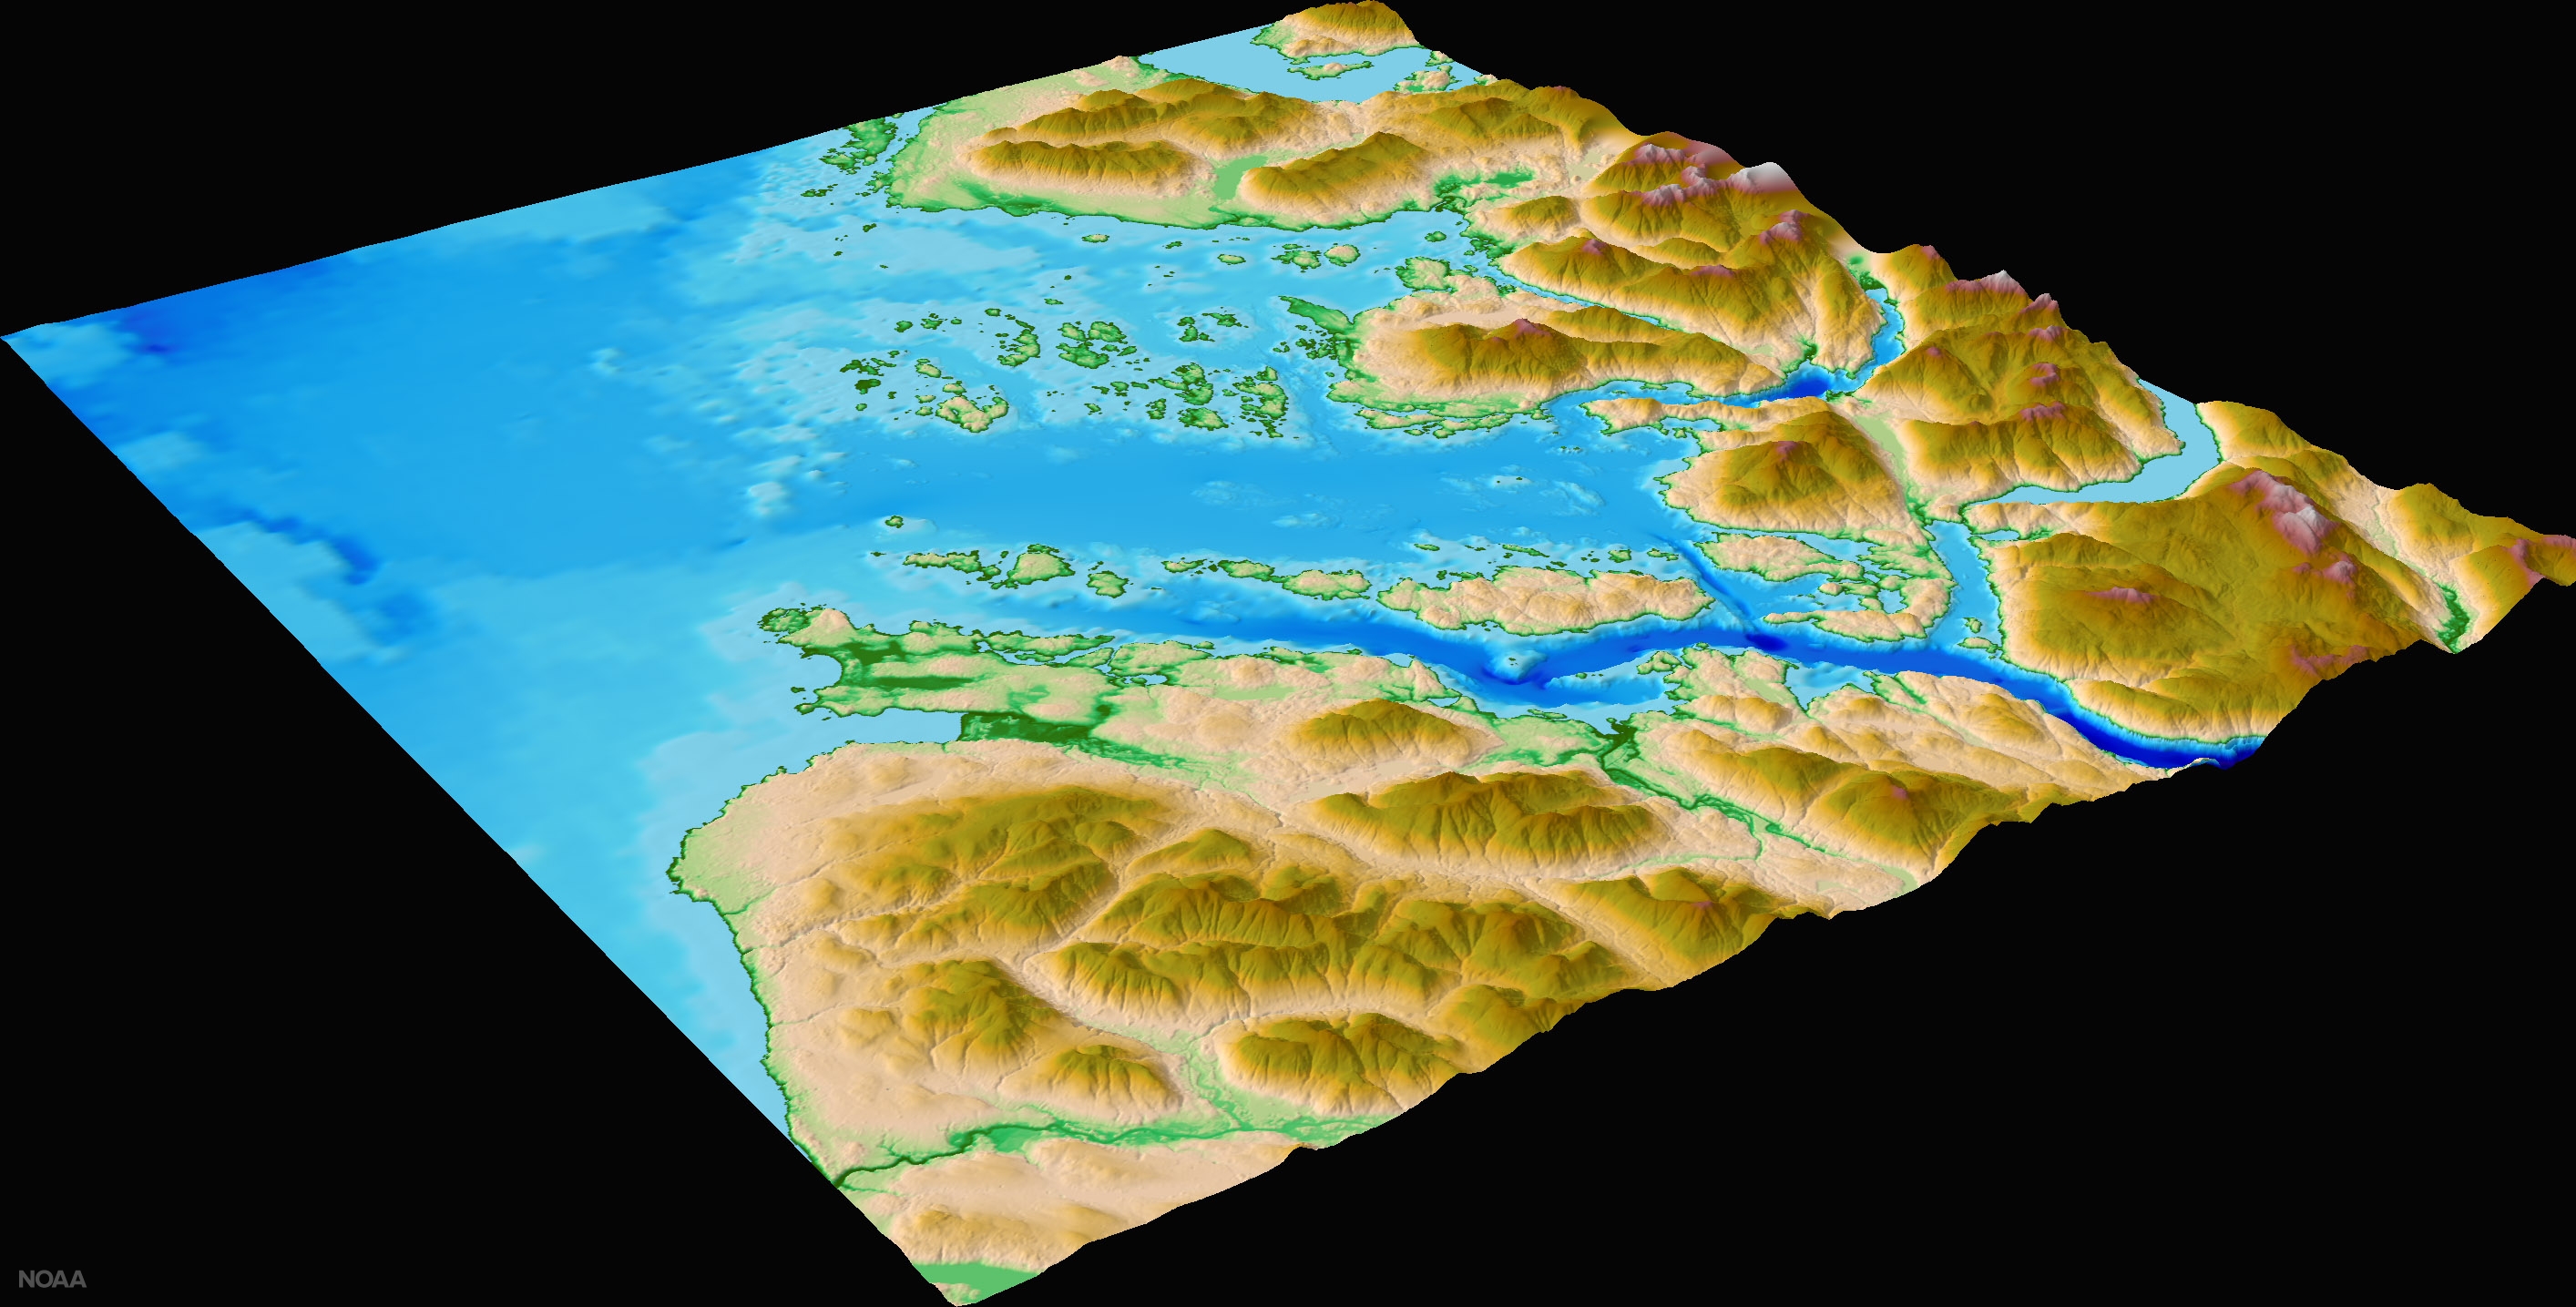 Image of a digital elevation model for Barkley Sound on the west coast of Canada’s Vancouver Island